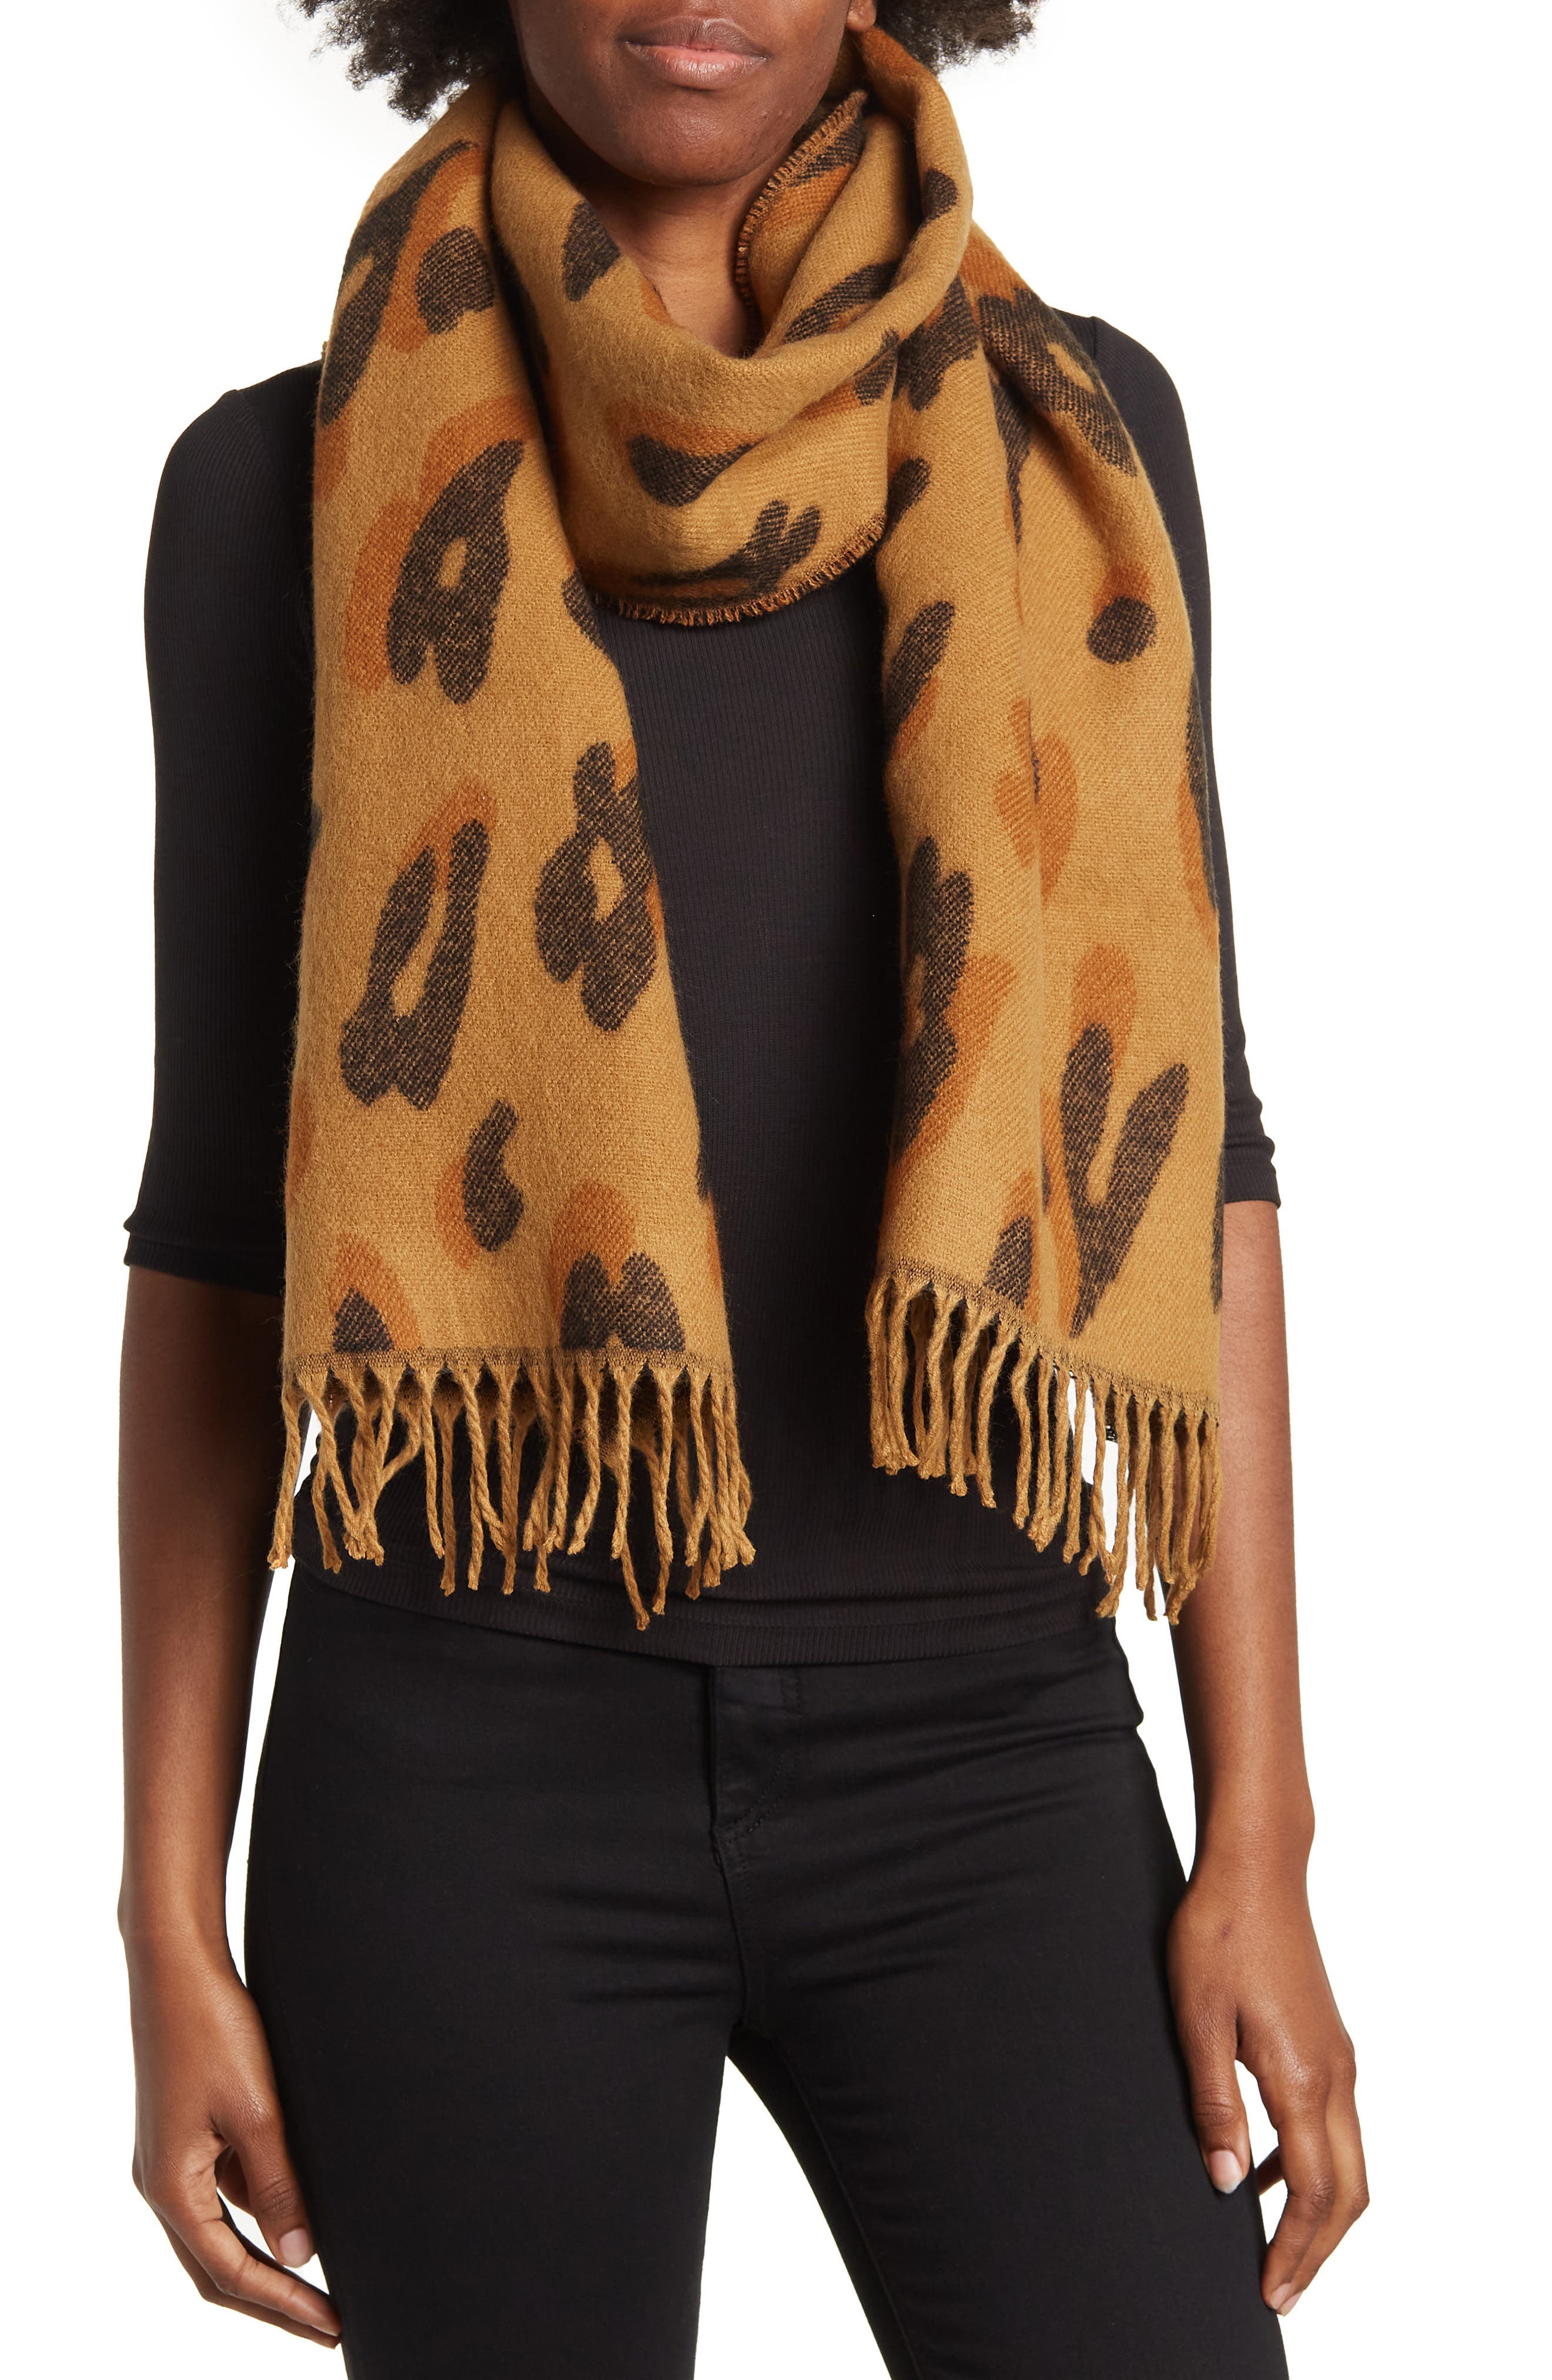 NEW WOMEN'S FREE PEOPLE RED BRUSHED ANIMAL WINTER SCARF 